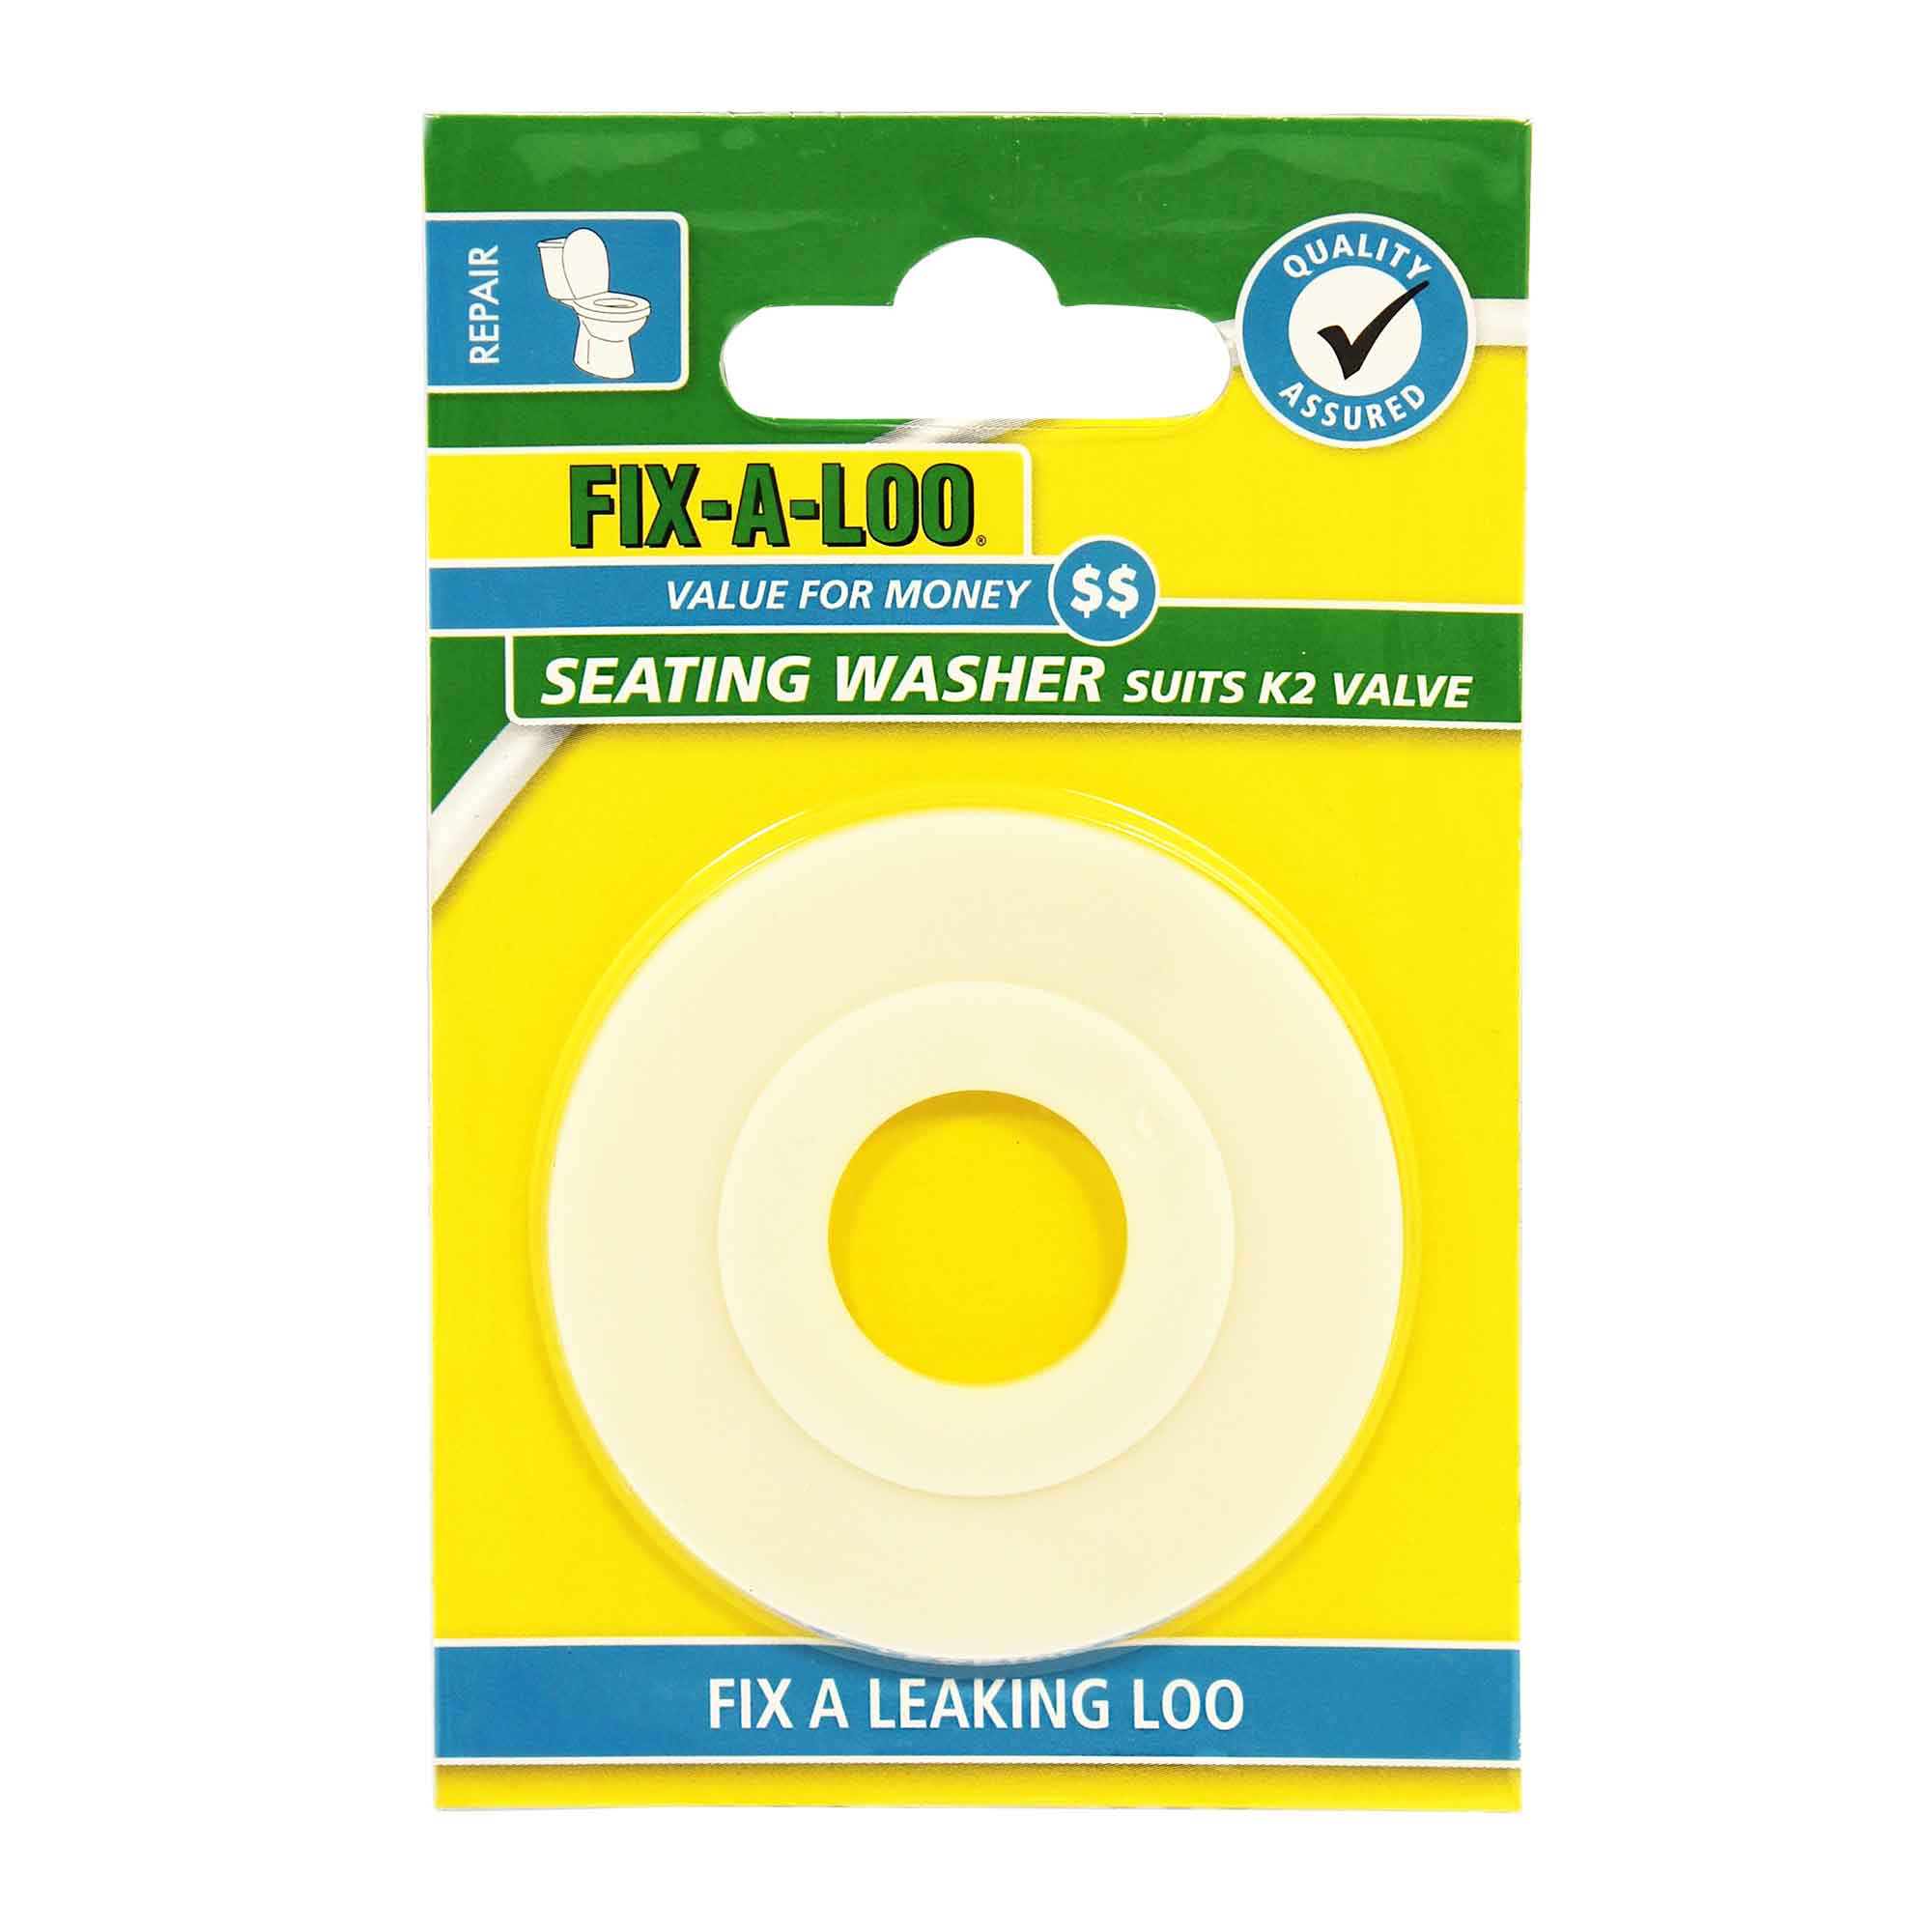 FIX-A-LOO Seating Washer Suits K2 Valve 226327 - Double Bay Hardware